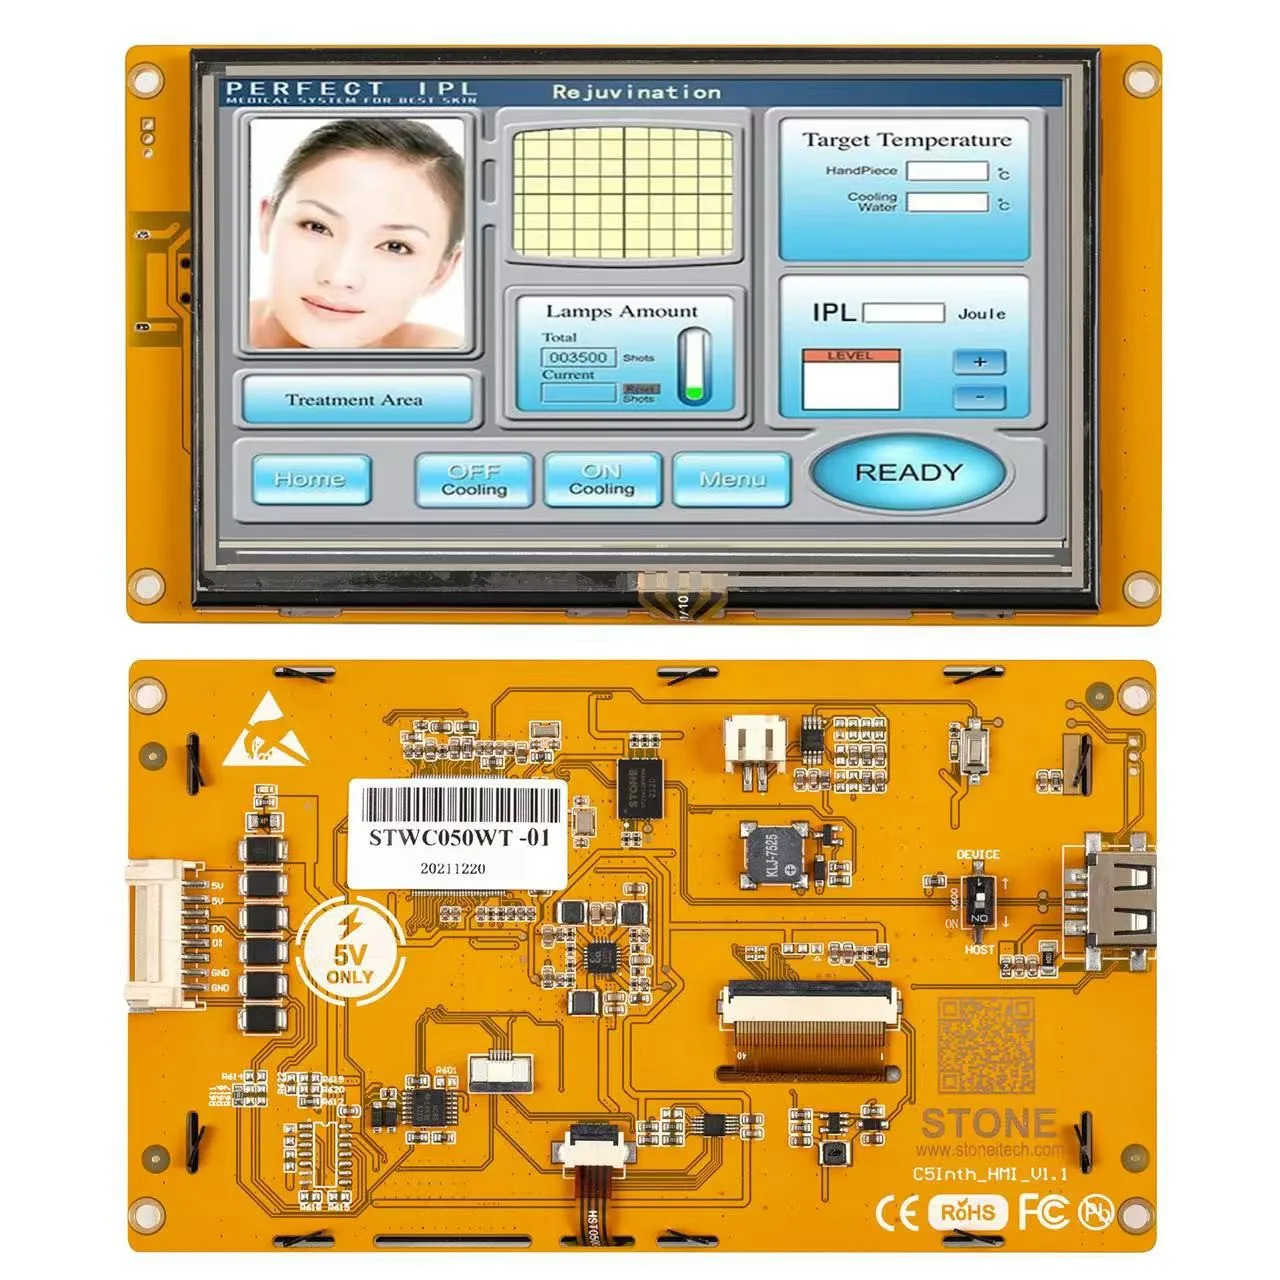 SCBRHMI 5 inch C Series HMI Resistive Touch Display Module Free Simulator Debug Support Assignment Operator